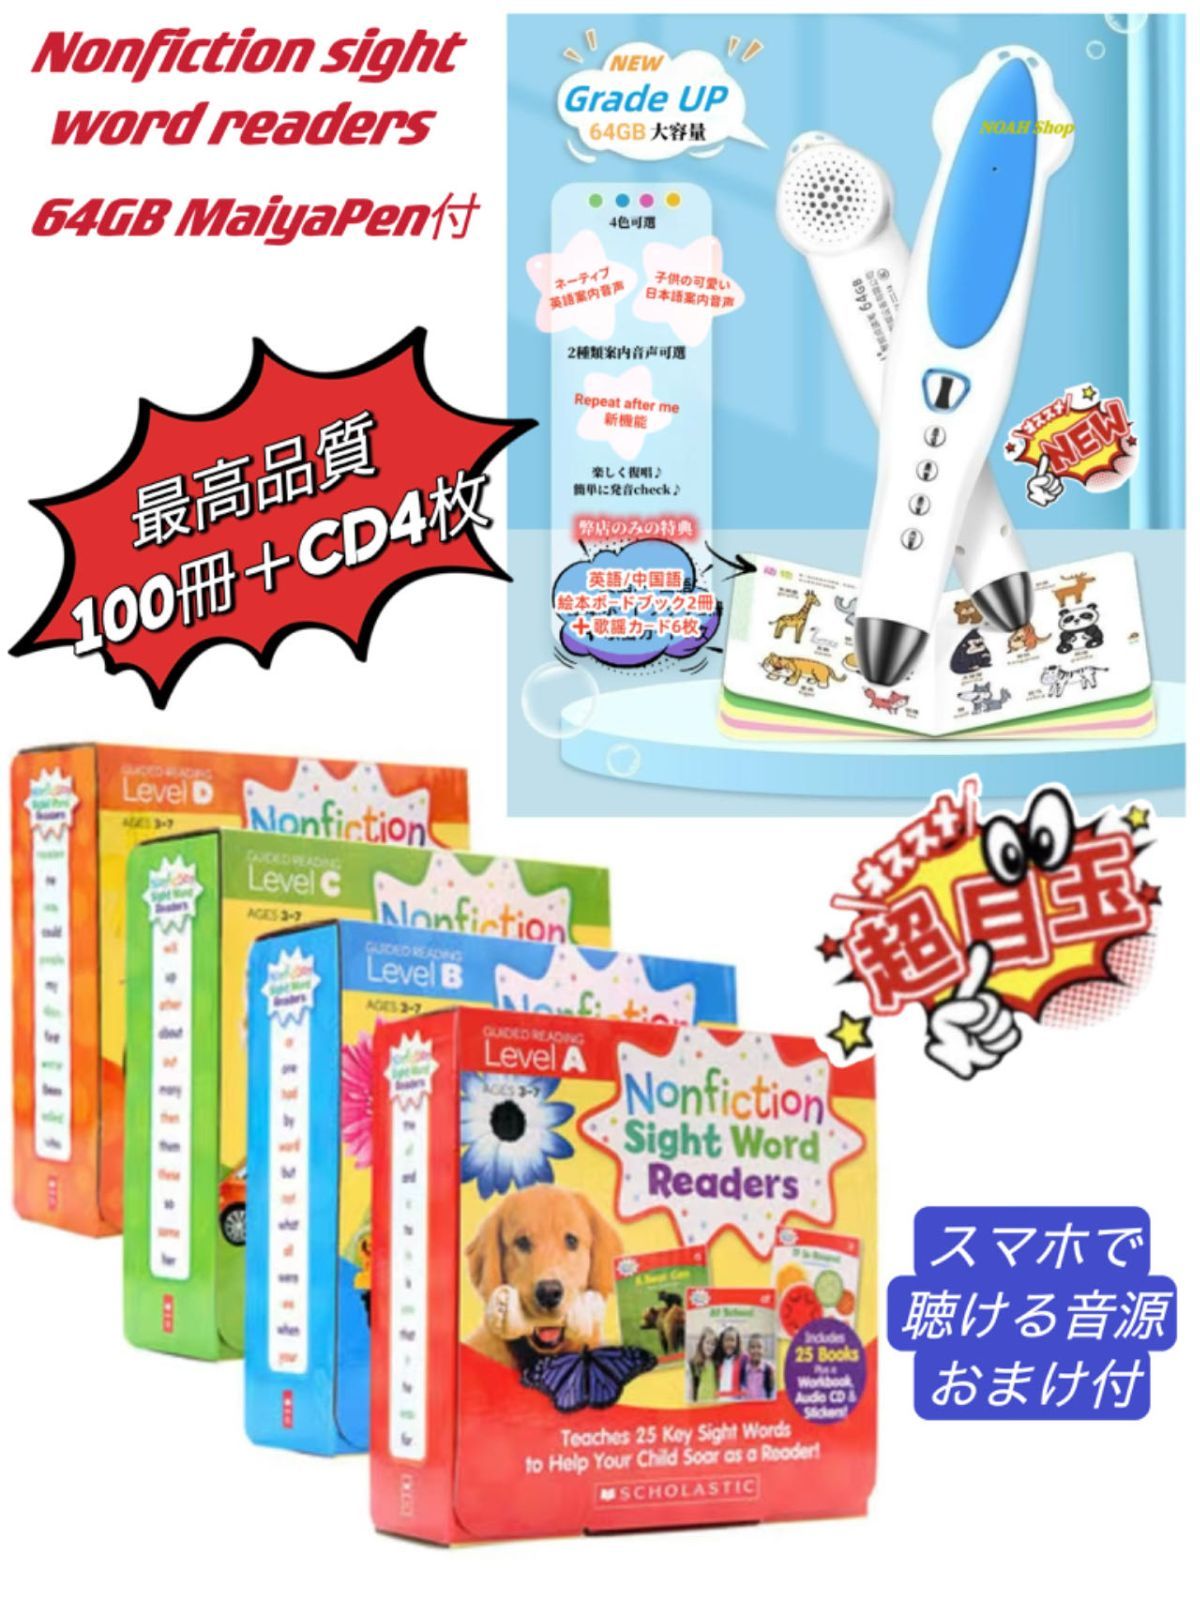 Nonfiction sight word readers 100冊+4CD